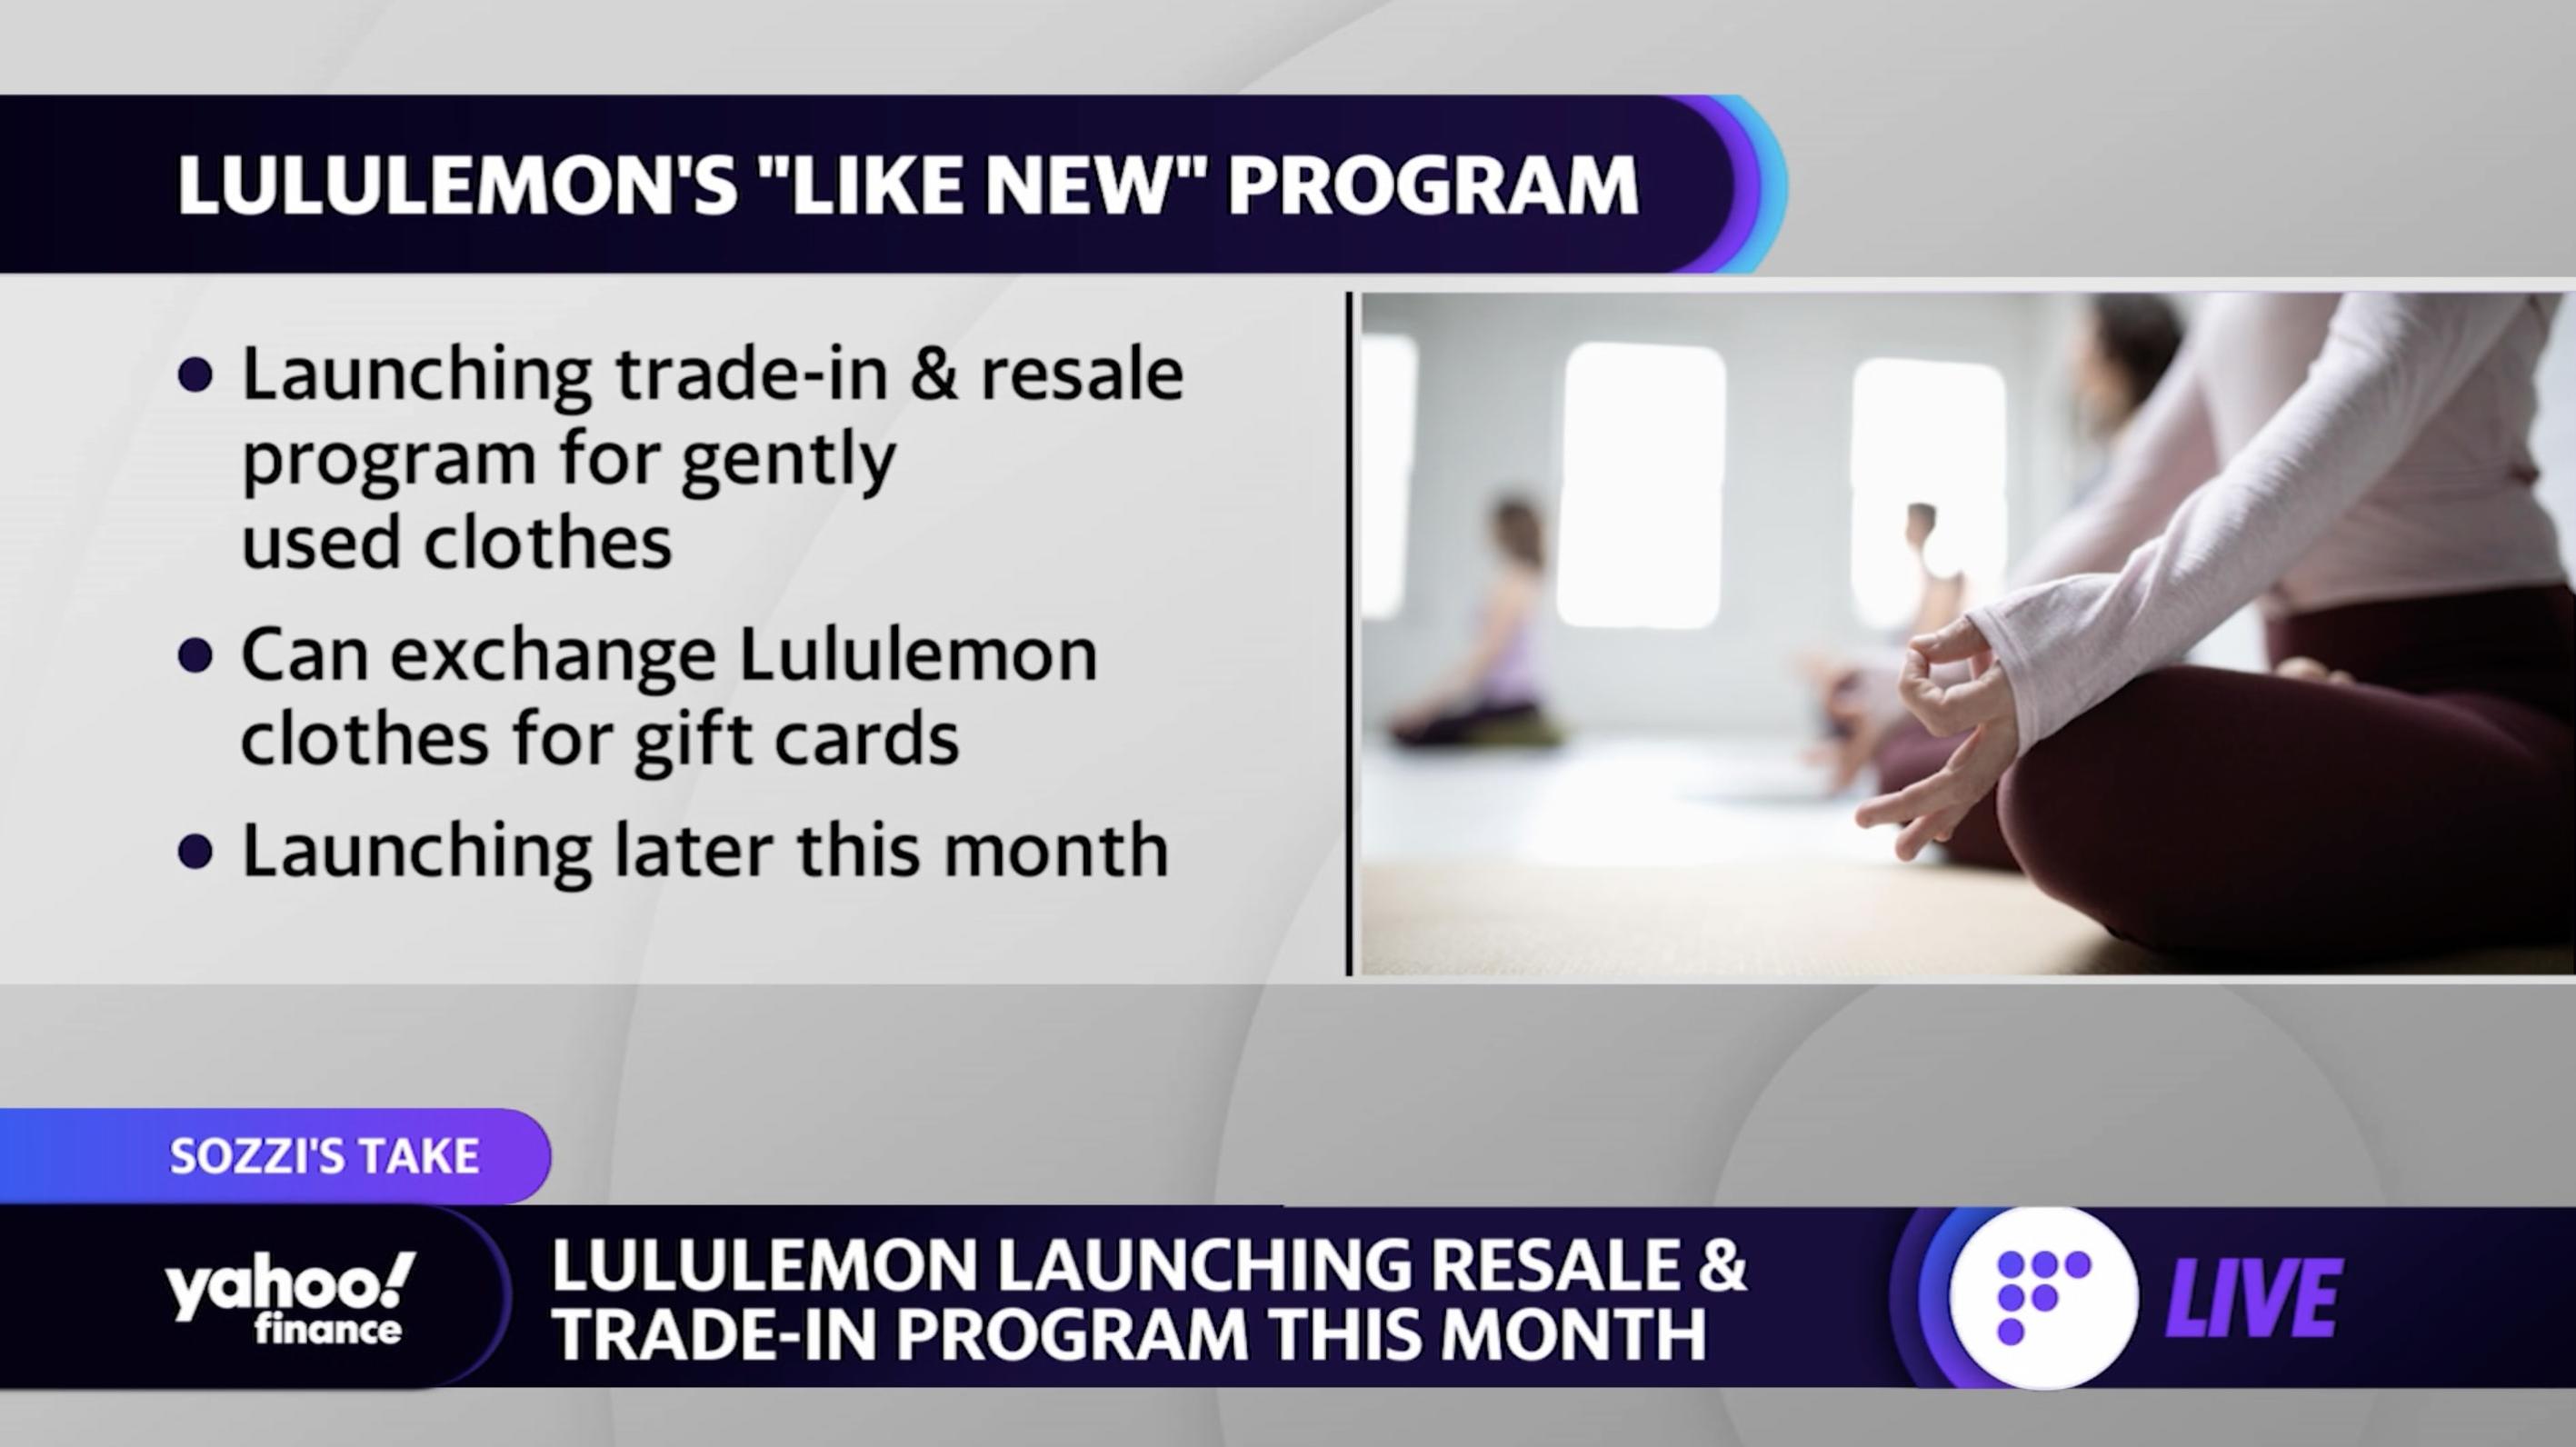 Lululemon just launched Like New, a trade-in and resale program nationwide